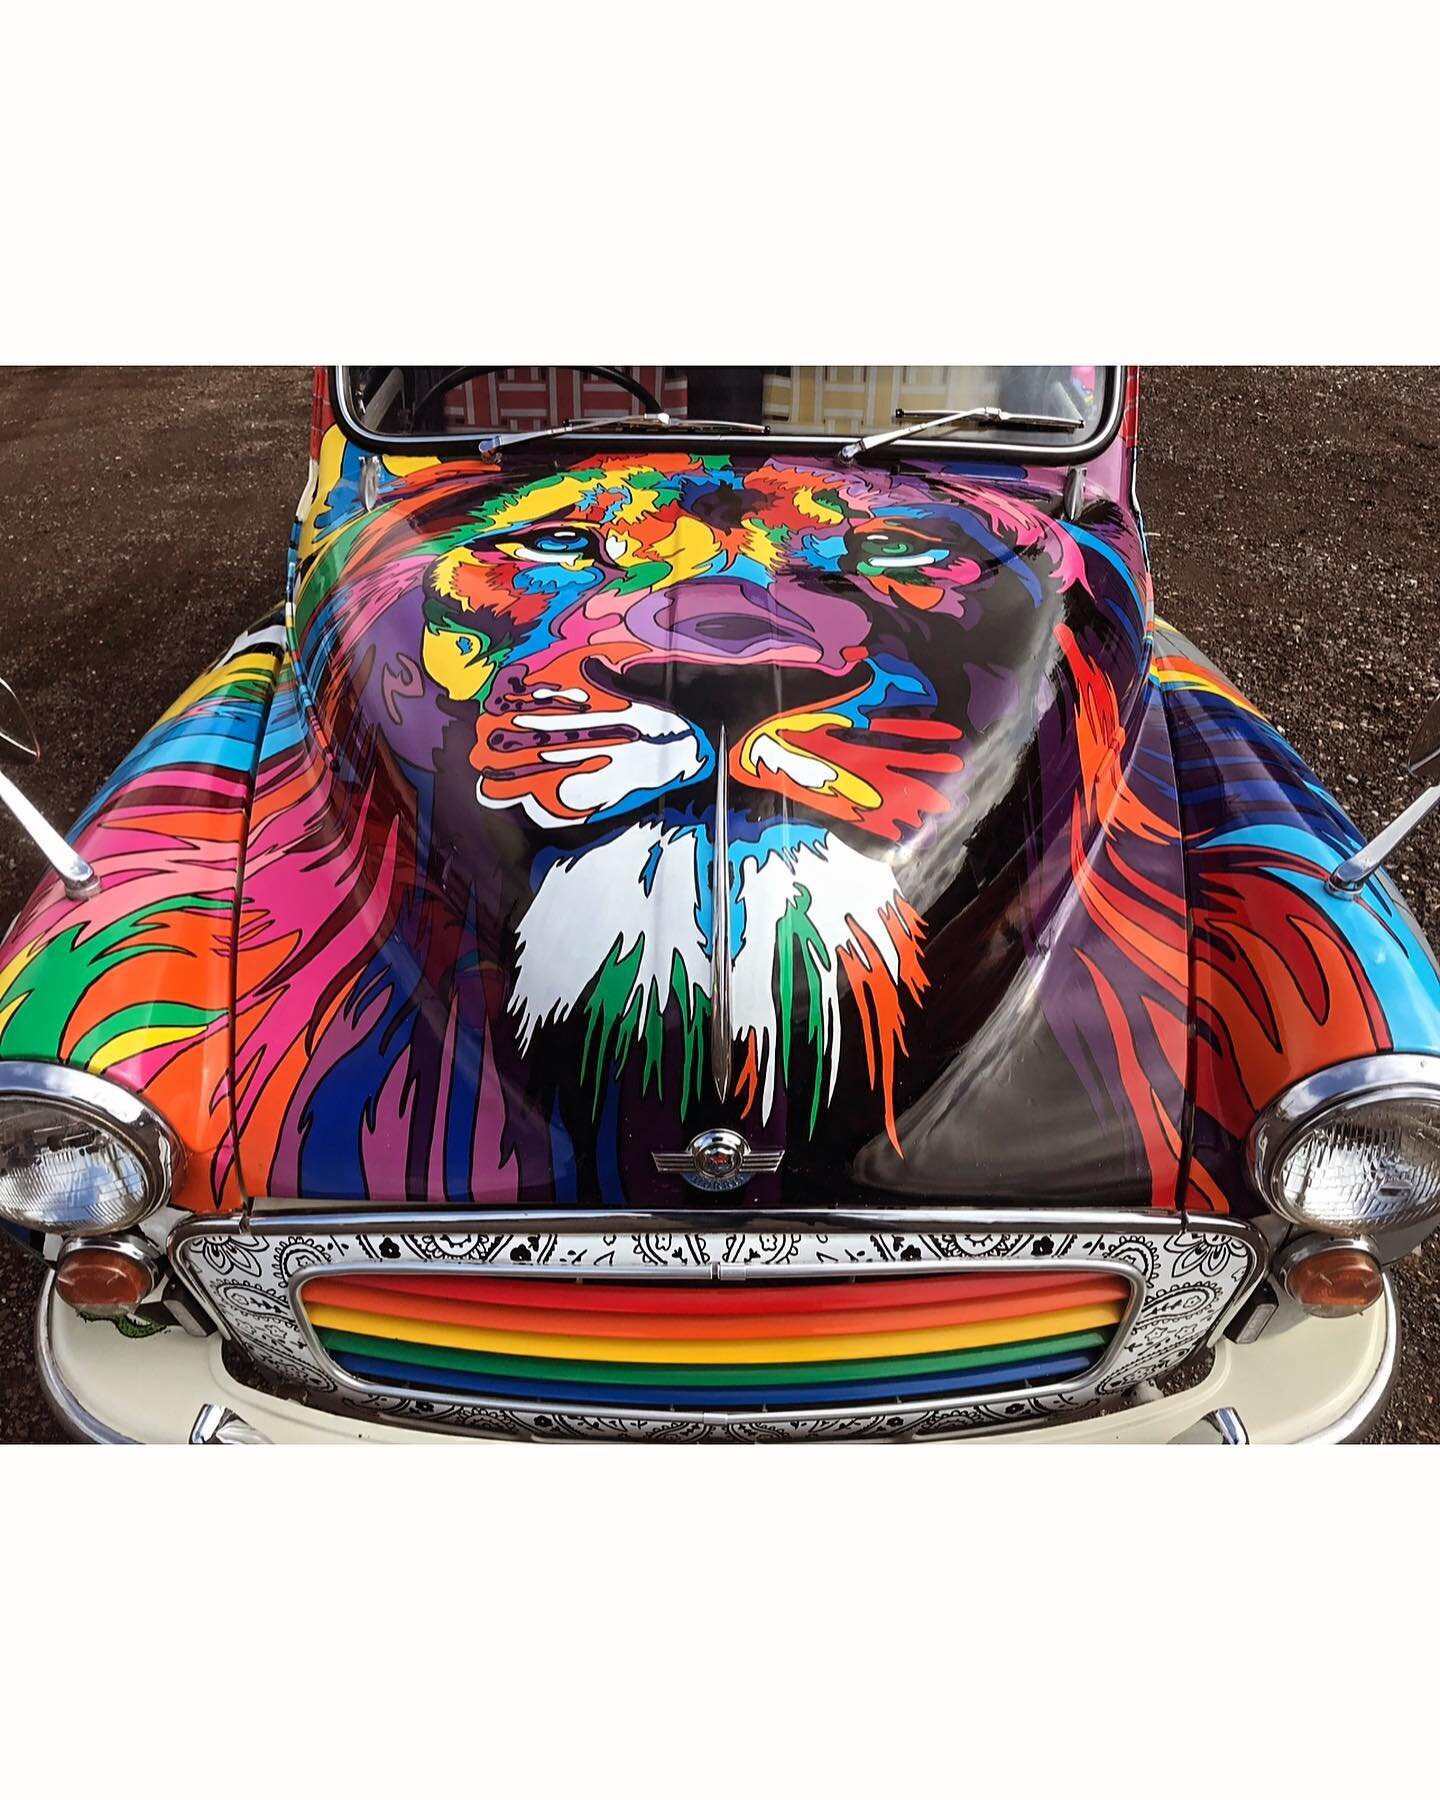 We like one of a kind and well this certainly is. I found this in Texas the last owner/builder was called Austin Starbuck ..yes really Amazing hand painted in &ldquo;One Shot&rdquo; enamel paint. Love this !! Available for hire or may sell &hellip; d